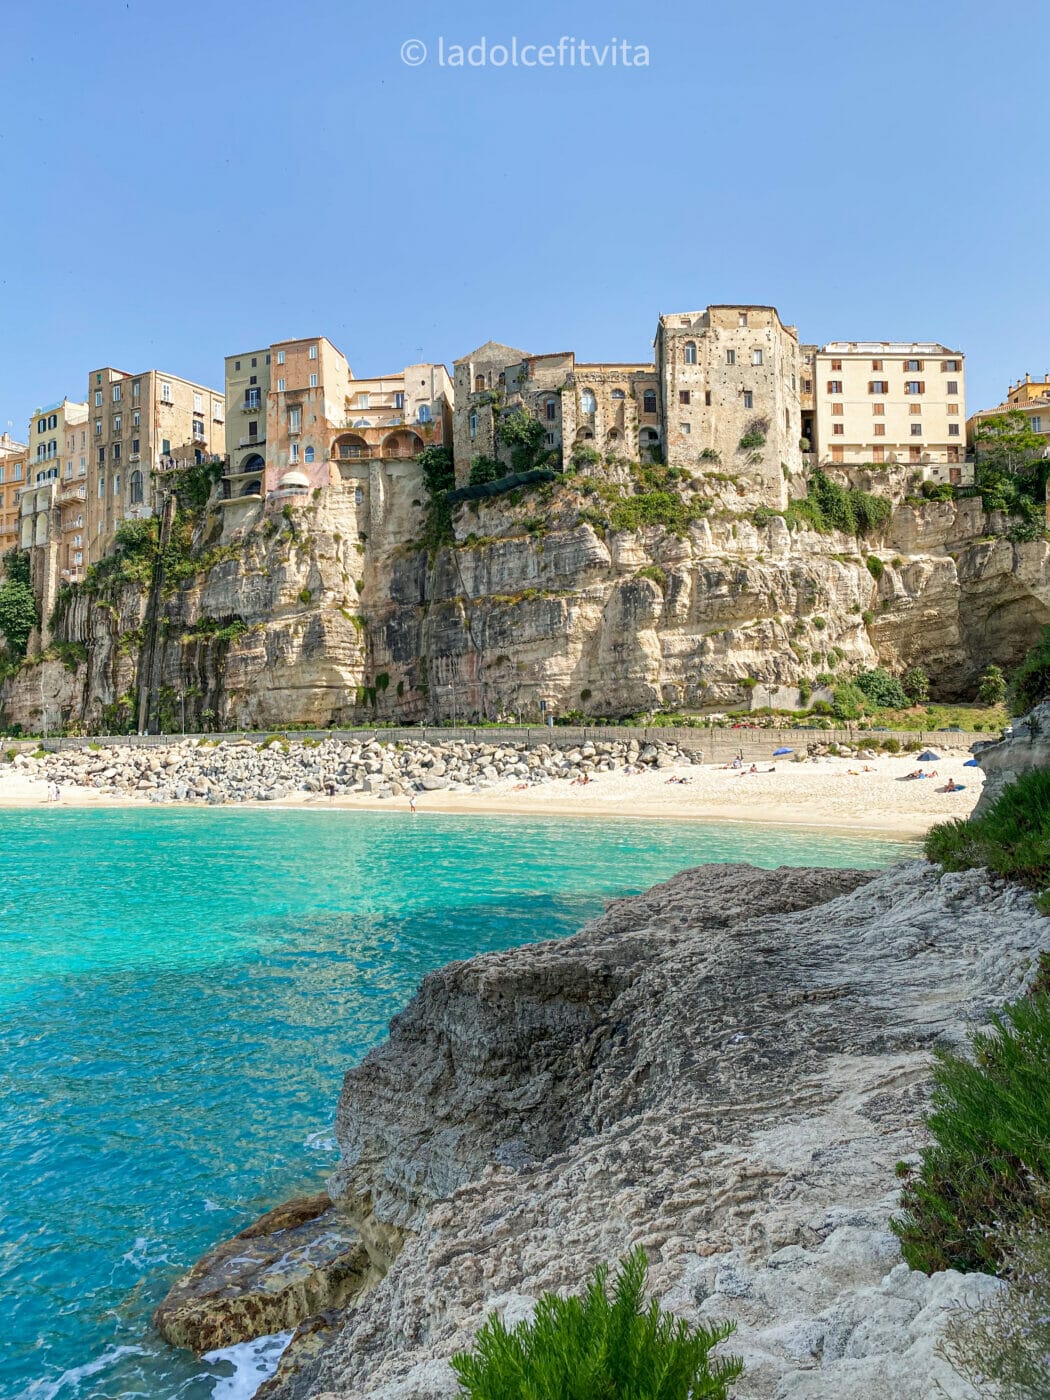 view from the Calabrian sea of the quaint beachside town of Tropea and its turquoise waters, Calabria Italy